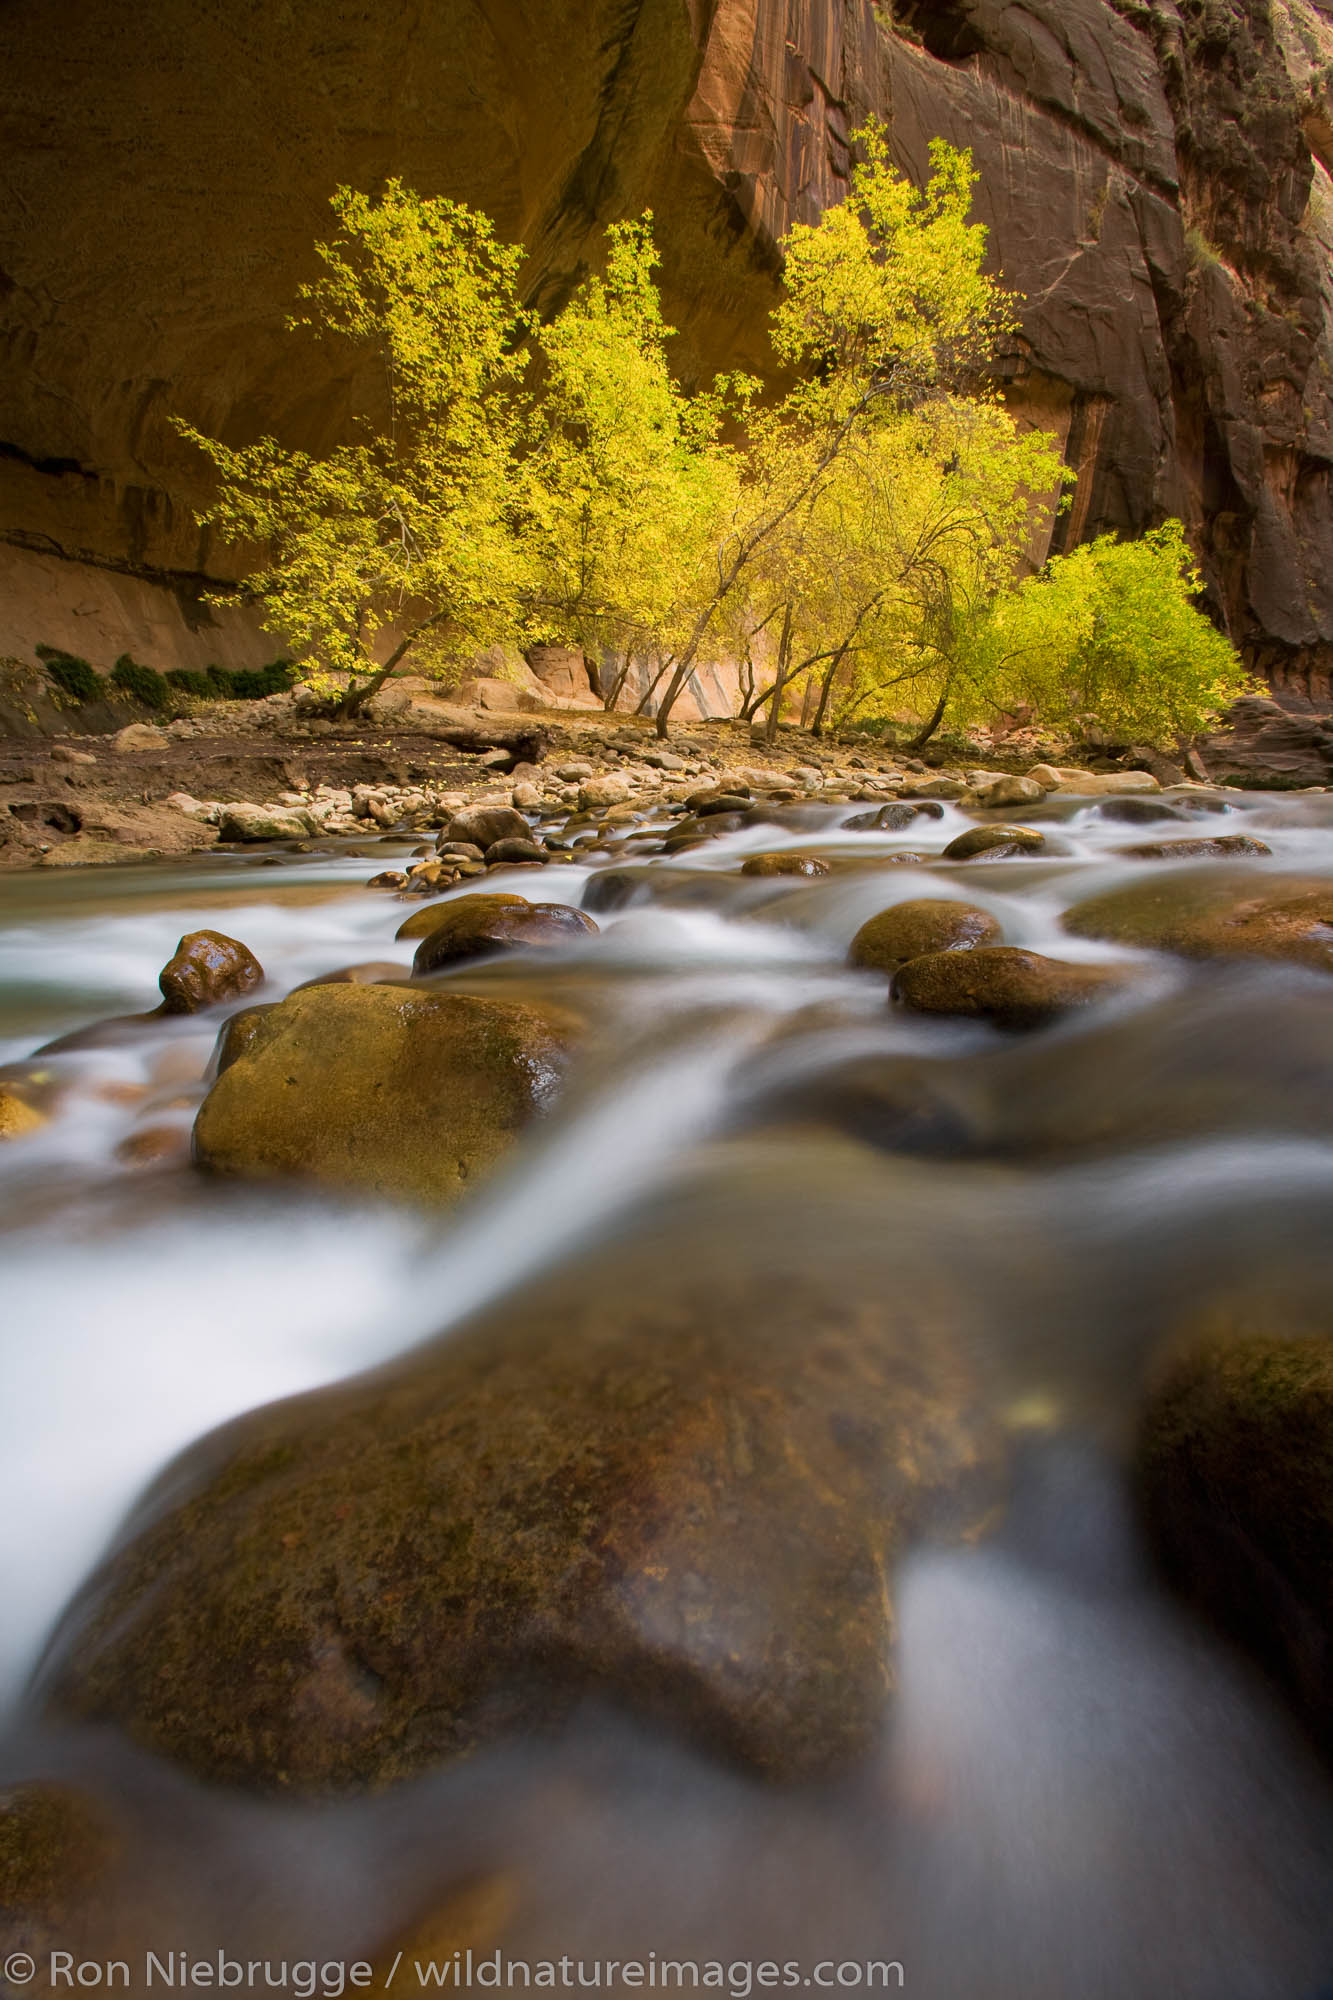 The Virgin River in the Zion Narrows, Zion National Park, Utah.